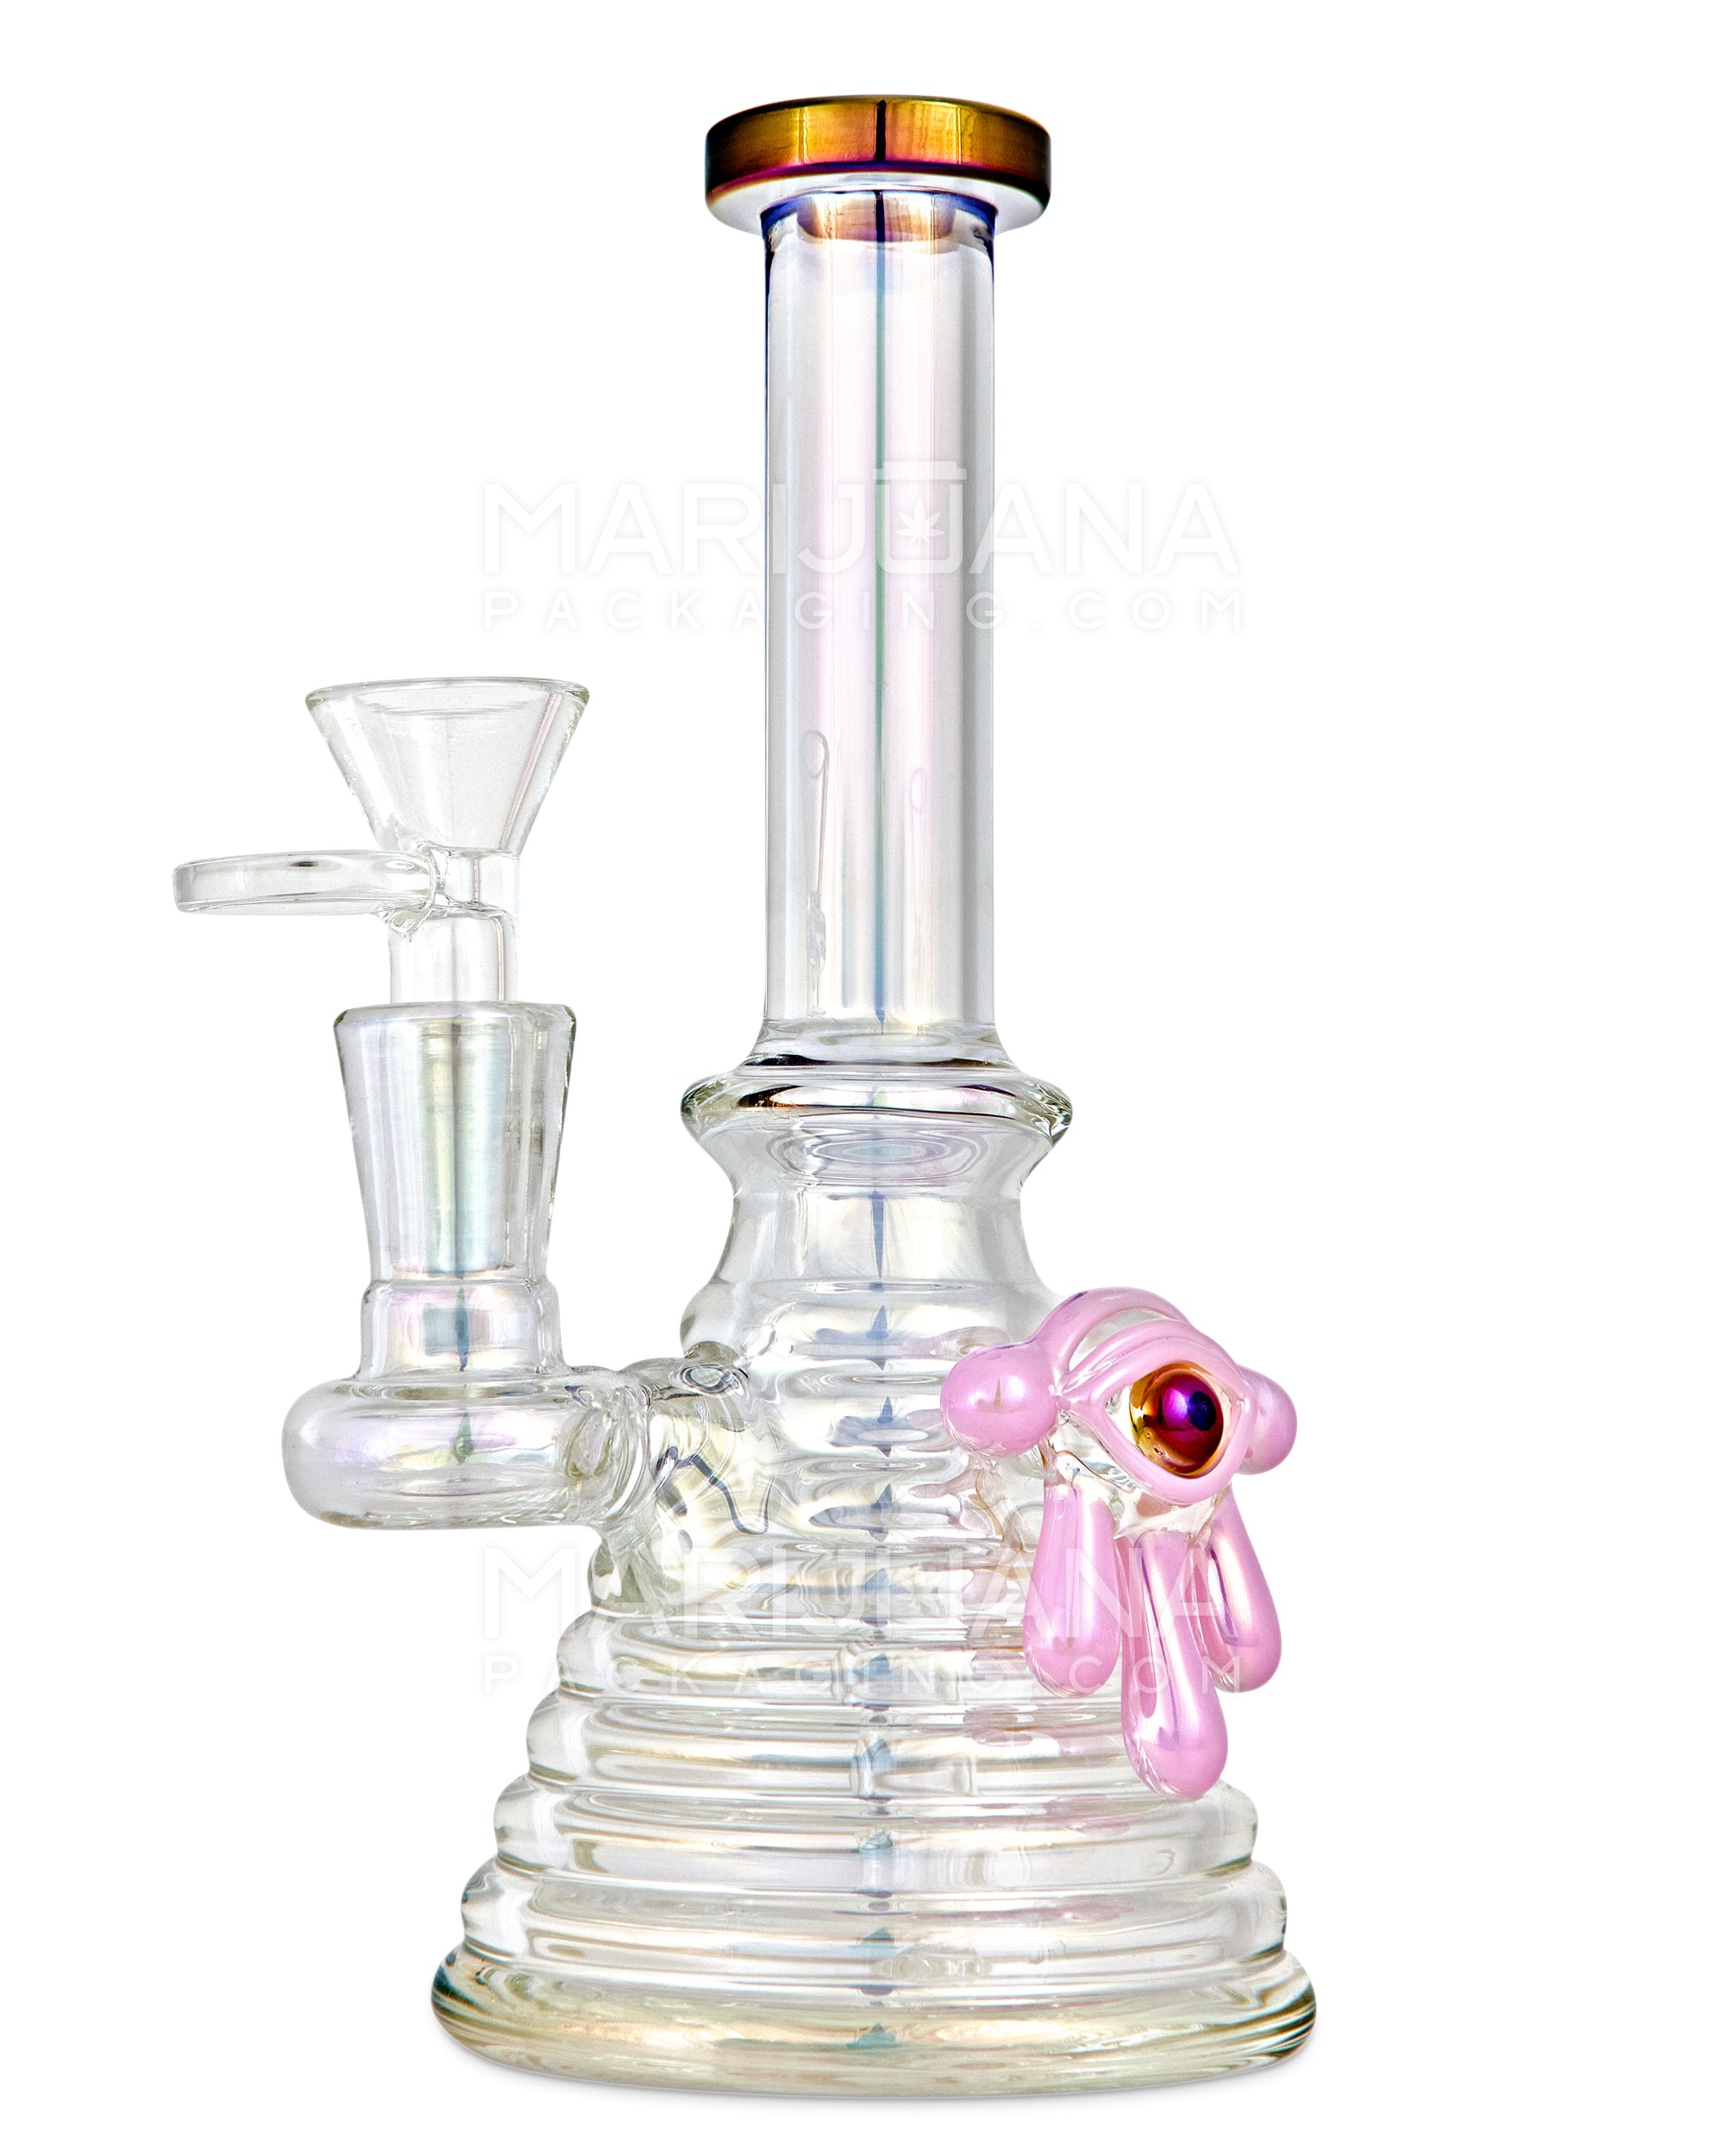 Straight Neck Diffused Perc Glass Ribbed Beaker Water Pipe w/ Pink Evil Eye | 7.5in Tall - 14mm Bowl - Iridescent - 5